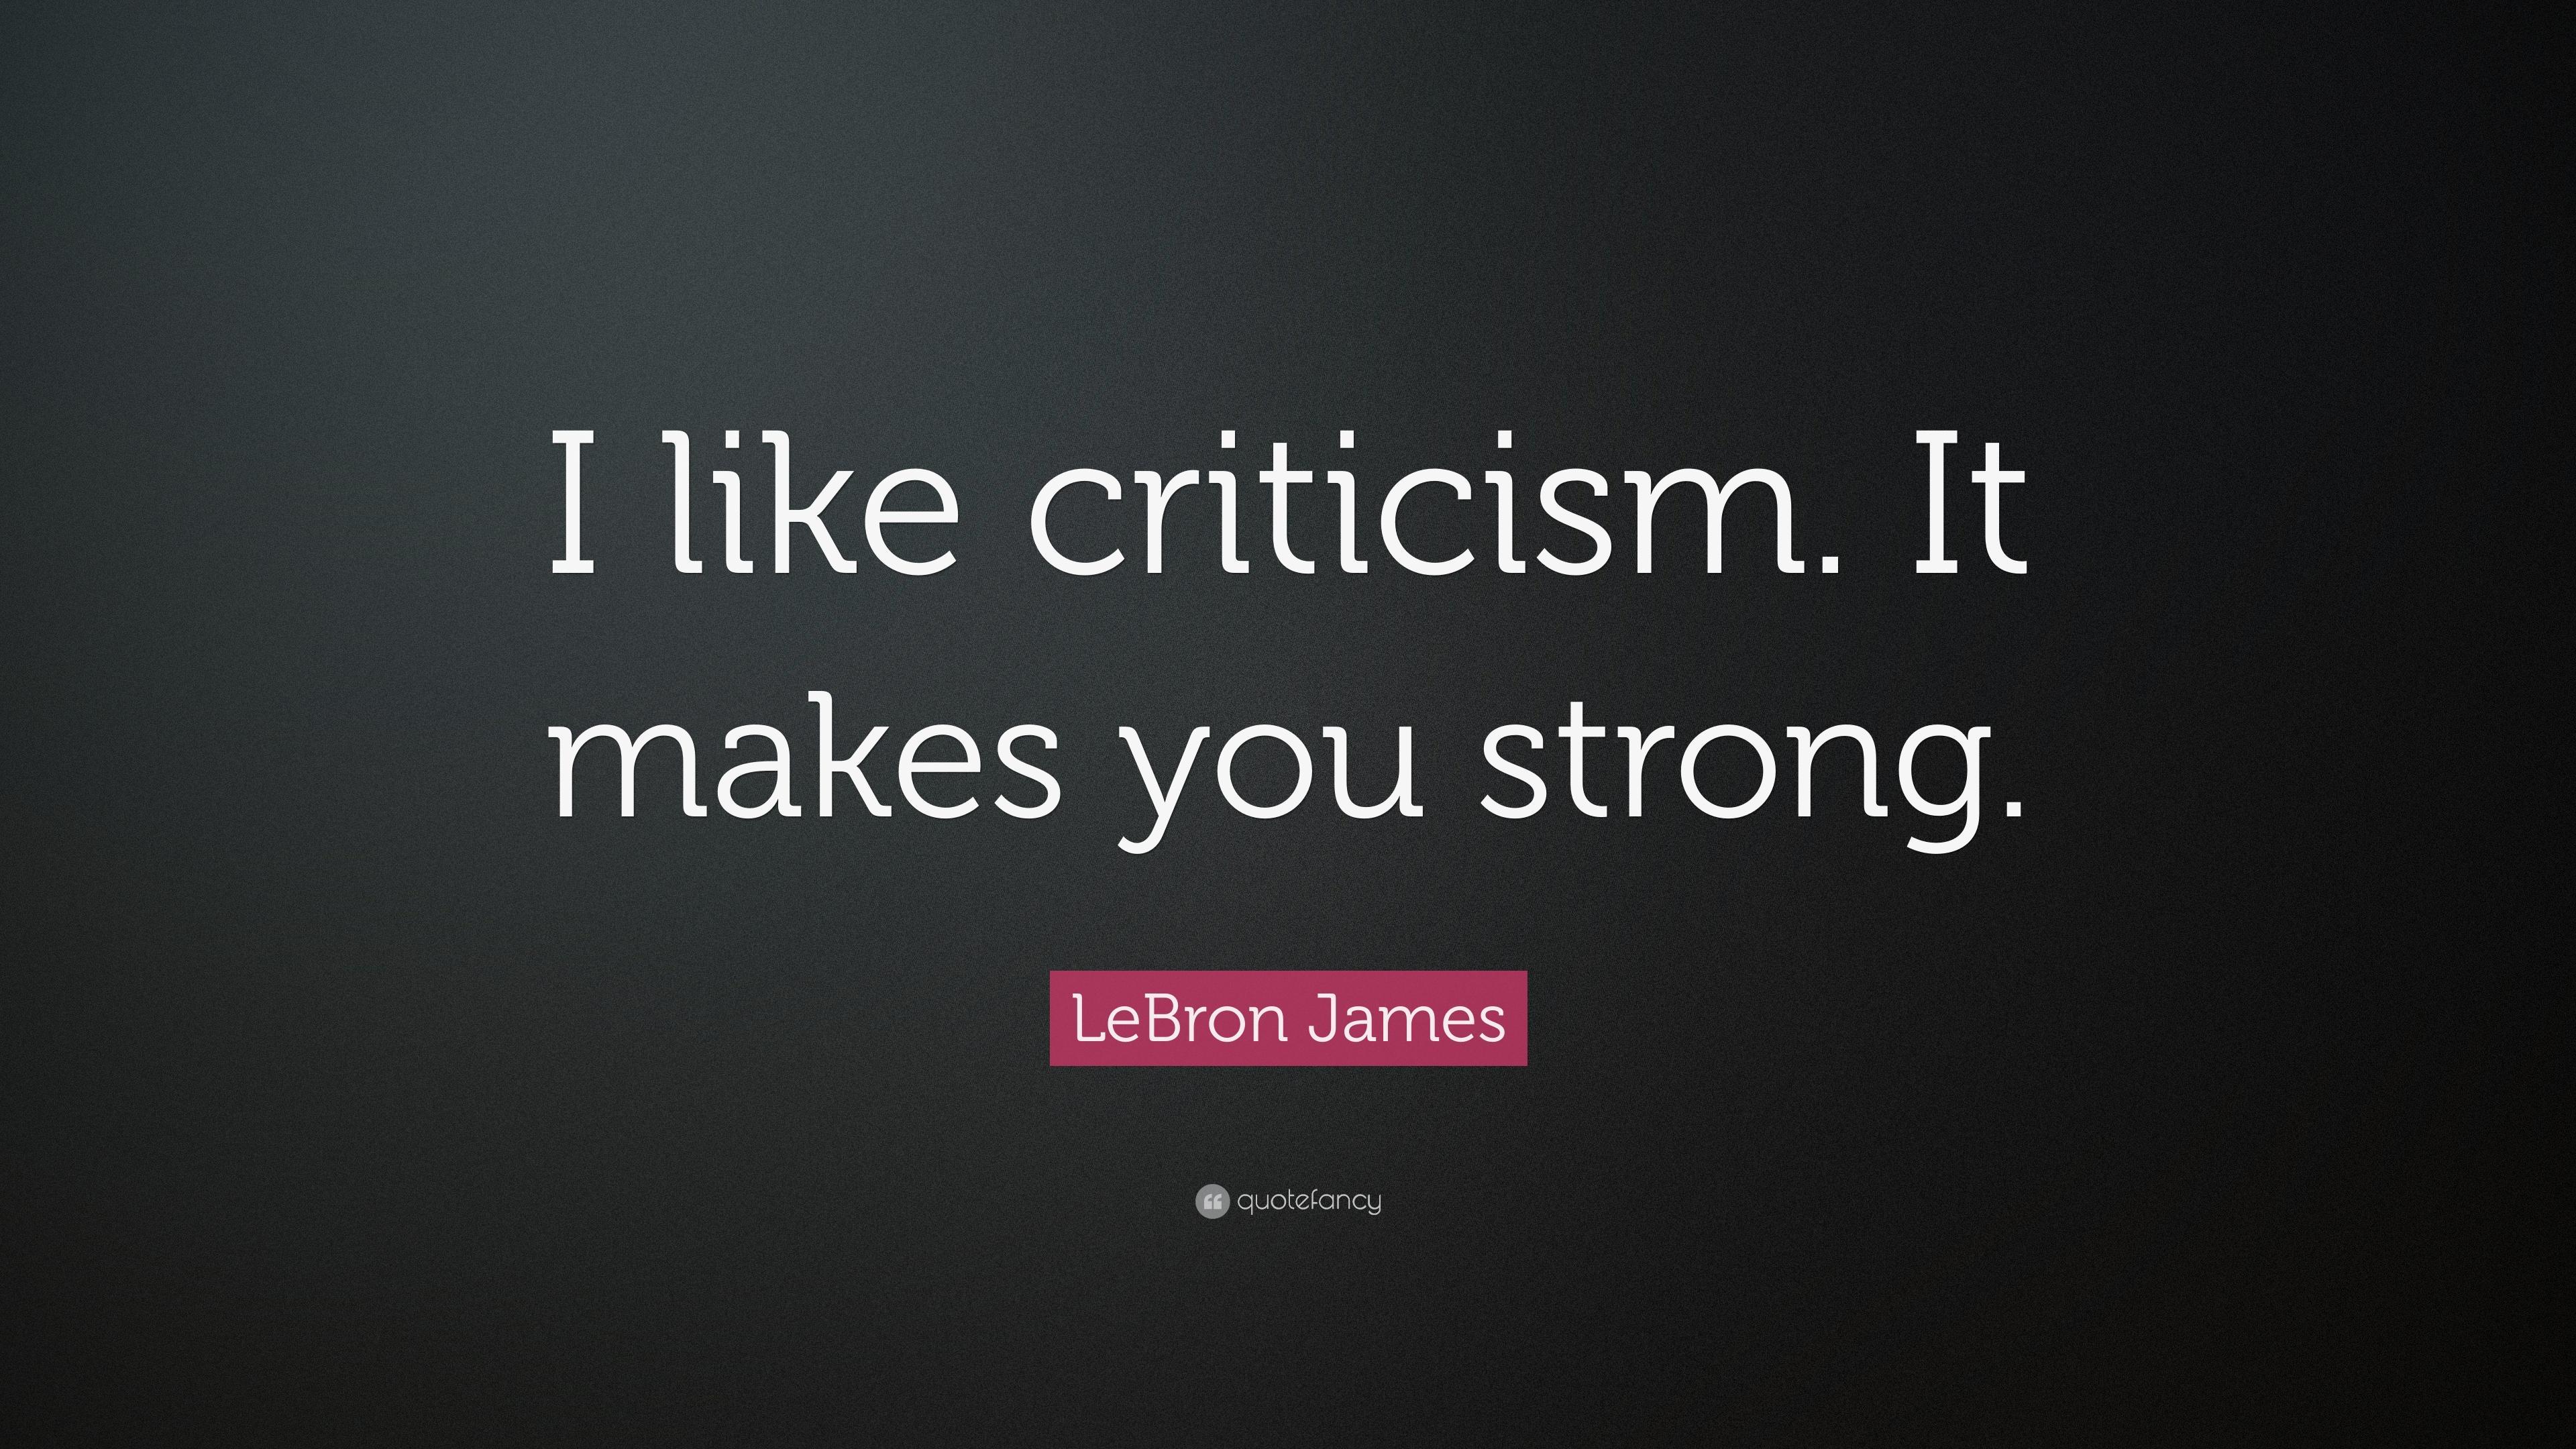 LeBron James Quote: “I like criticism. It makes you strong